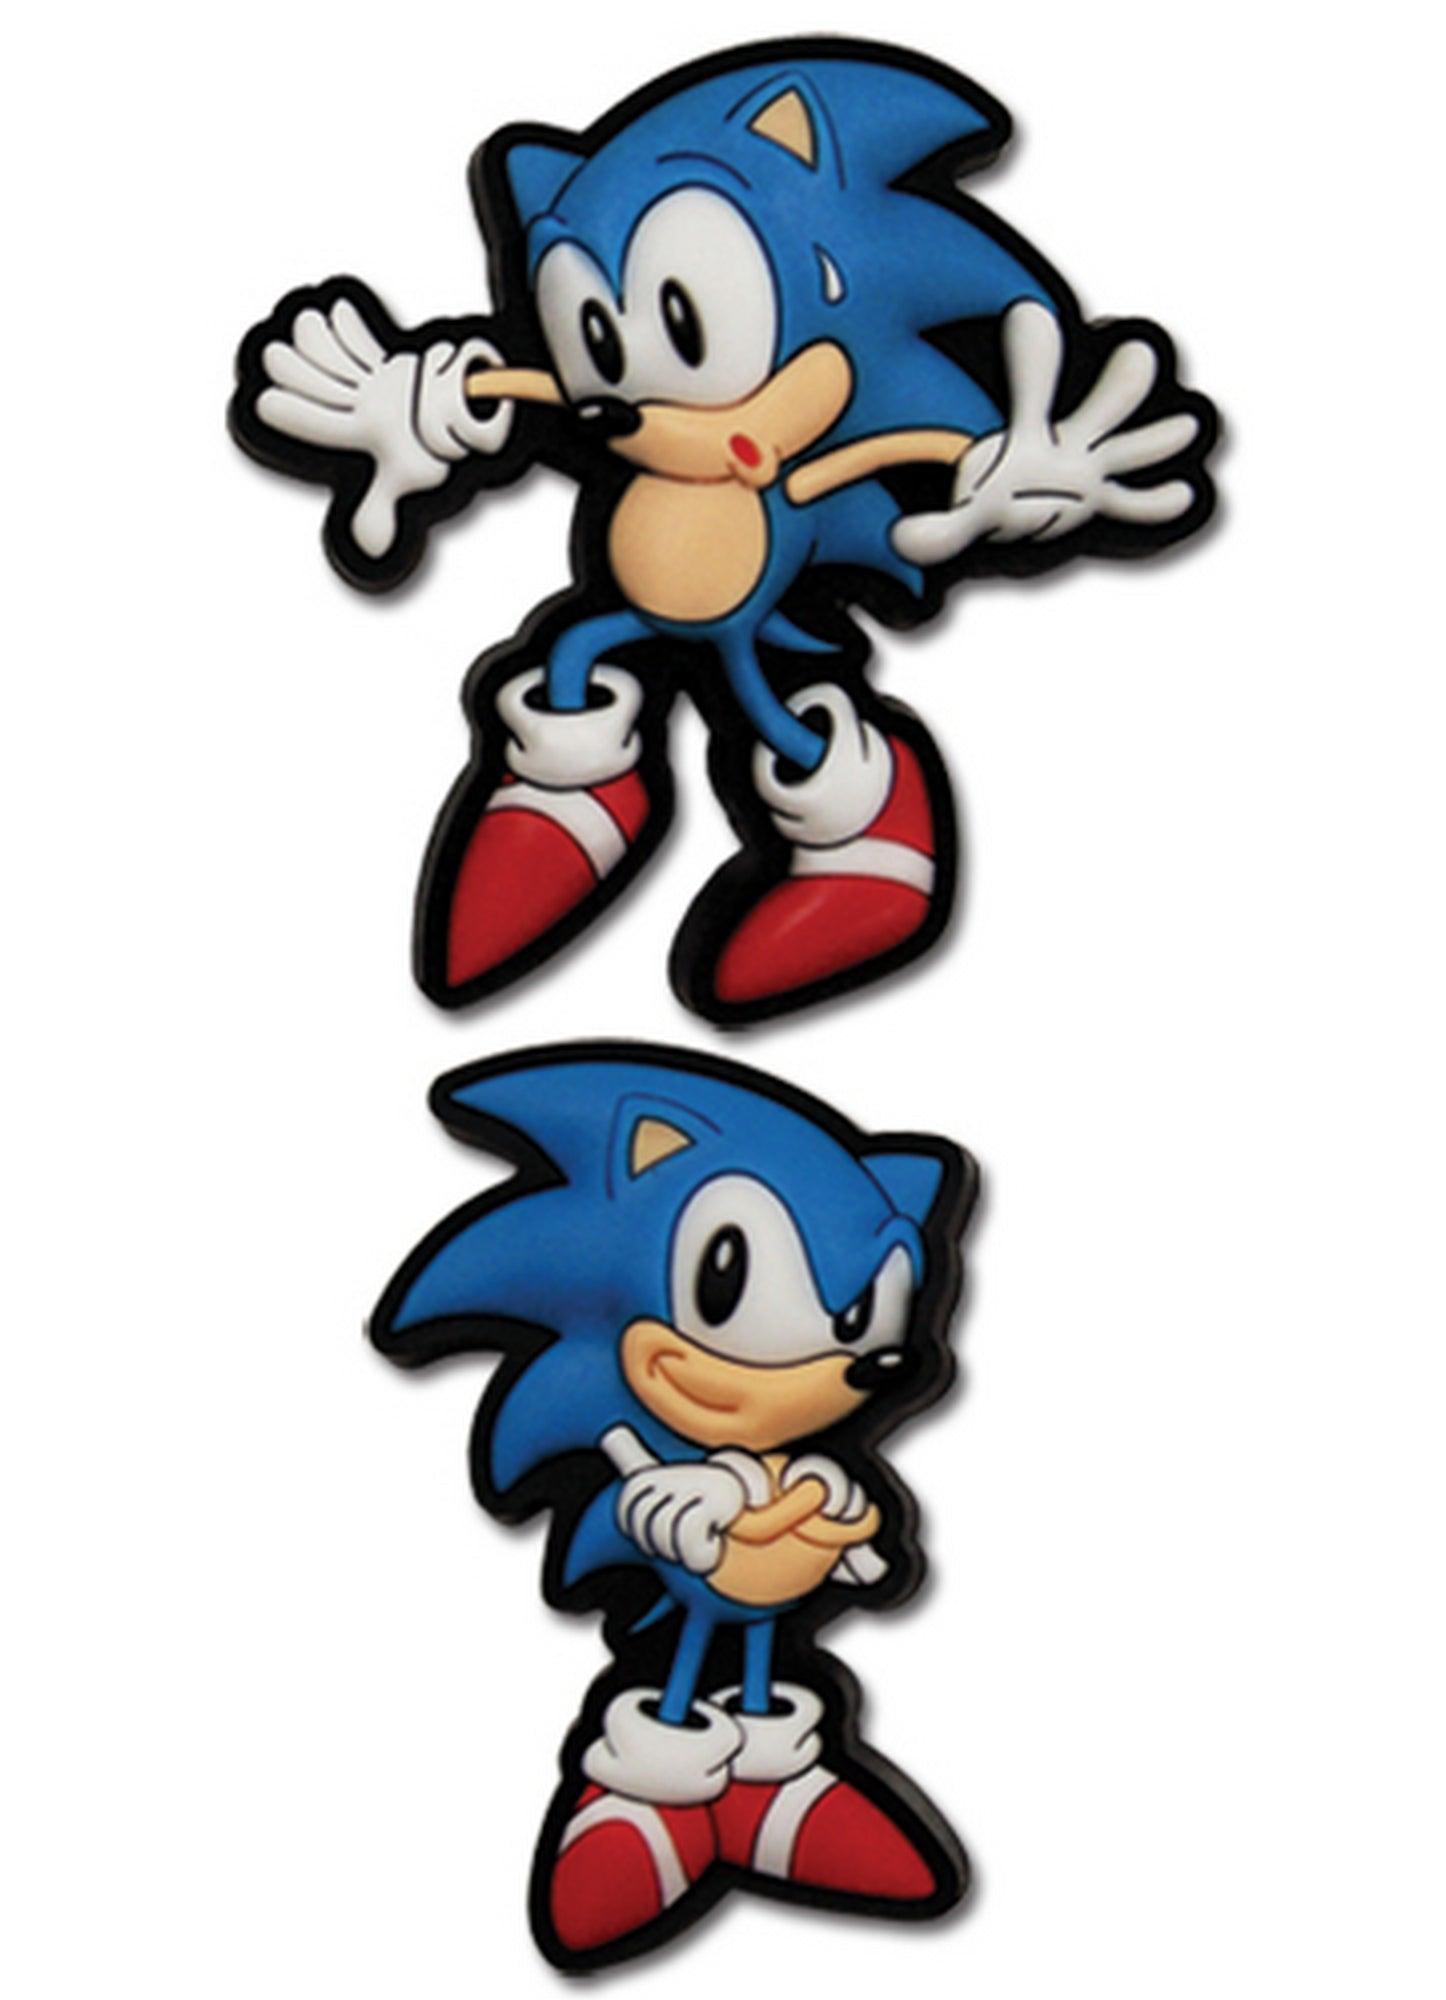 Classic Sonic Sonic The Hedgehog Sticker - Classic Sonic Sonic the